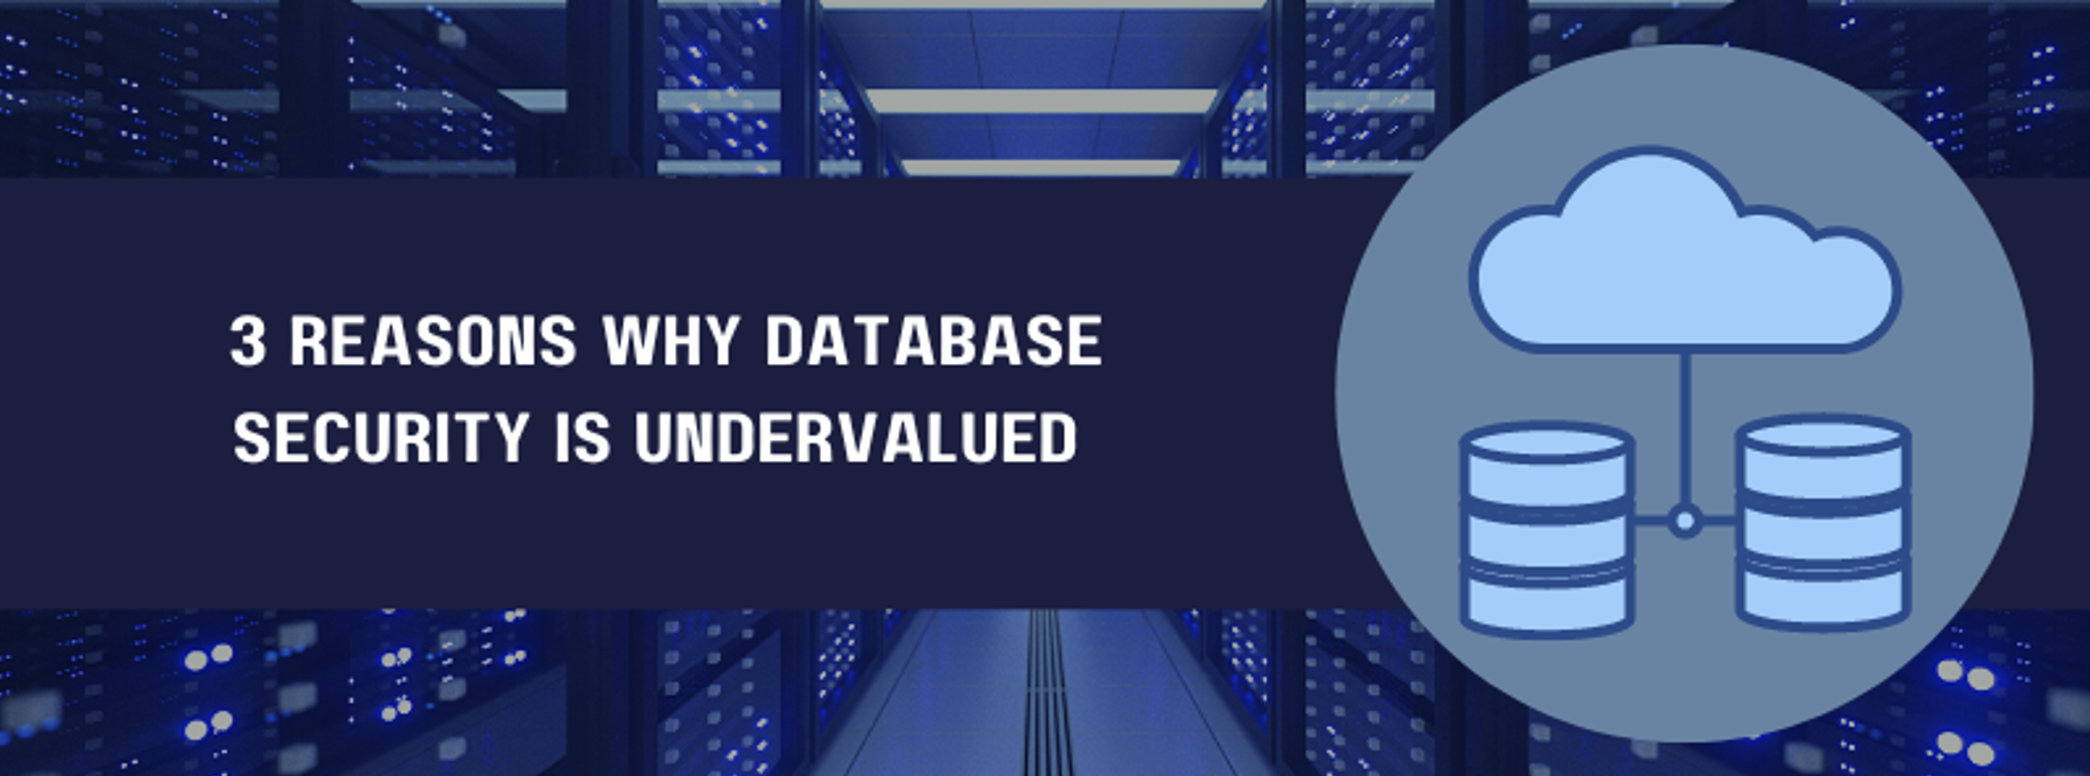 3 Reasons Why Database Security is Undervalued